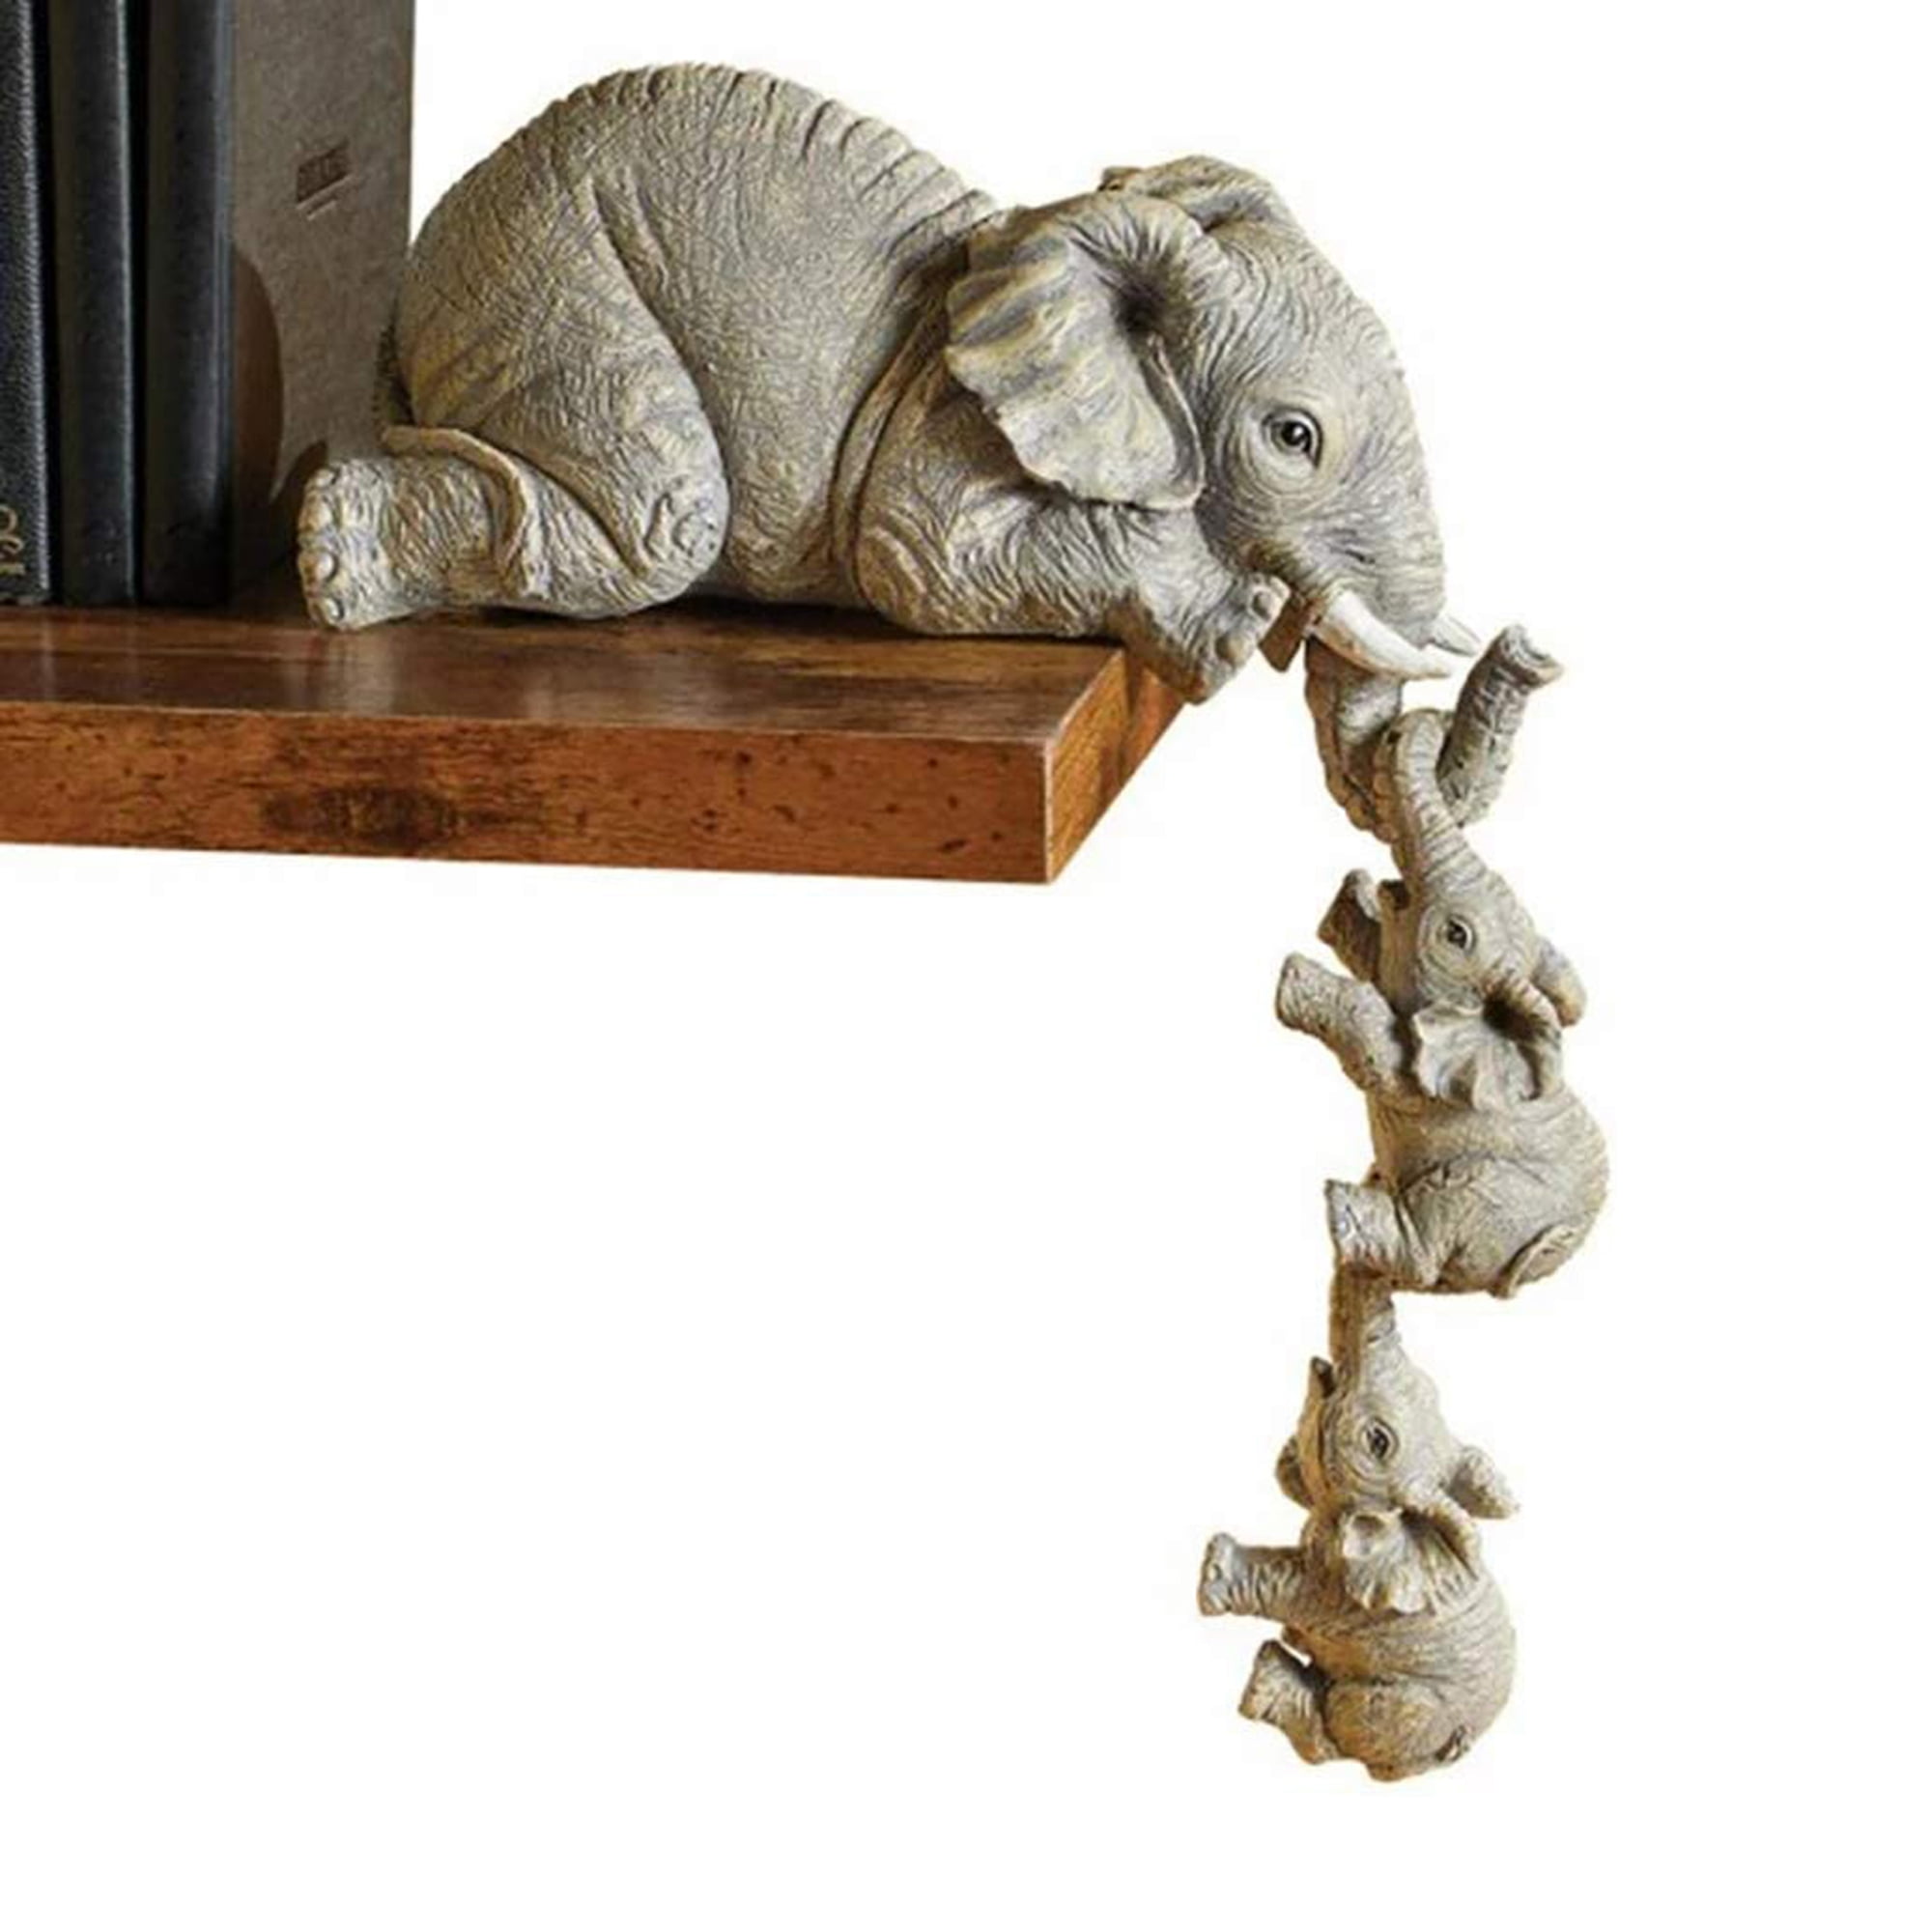 2.5 Inch Stone Carving Elephant Sculpture Wealth Animal Figurine Home Decor Gift 